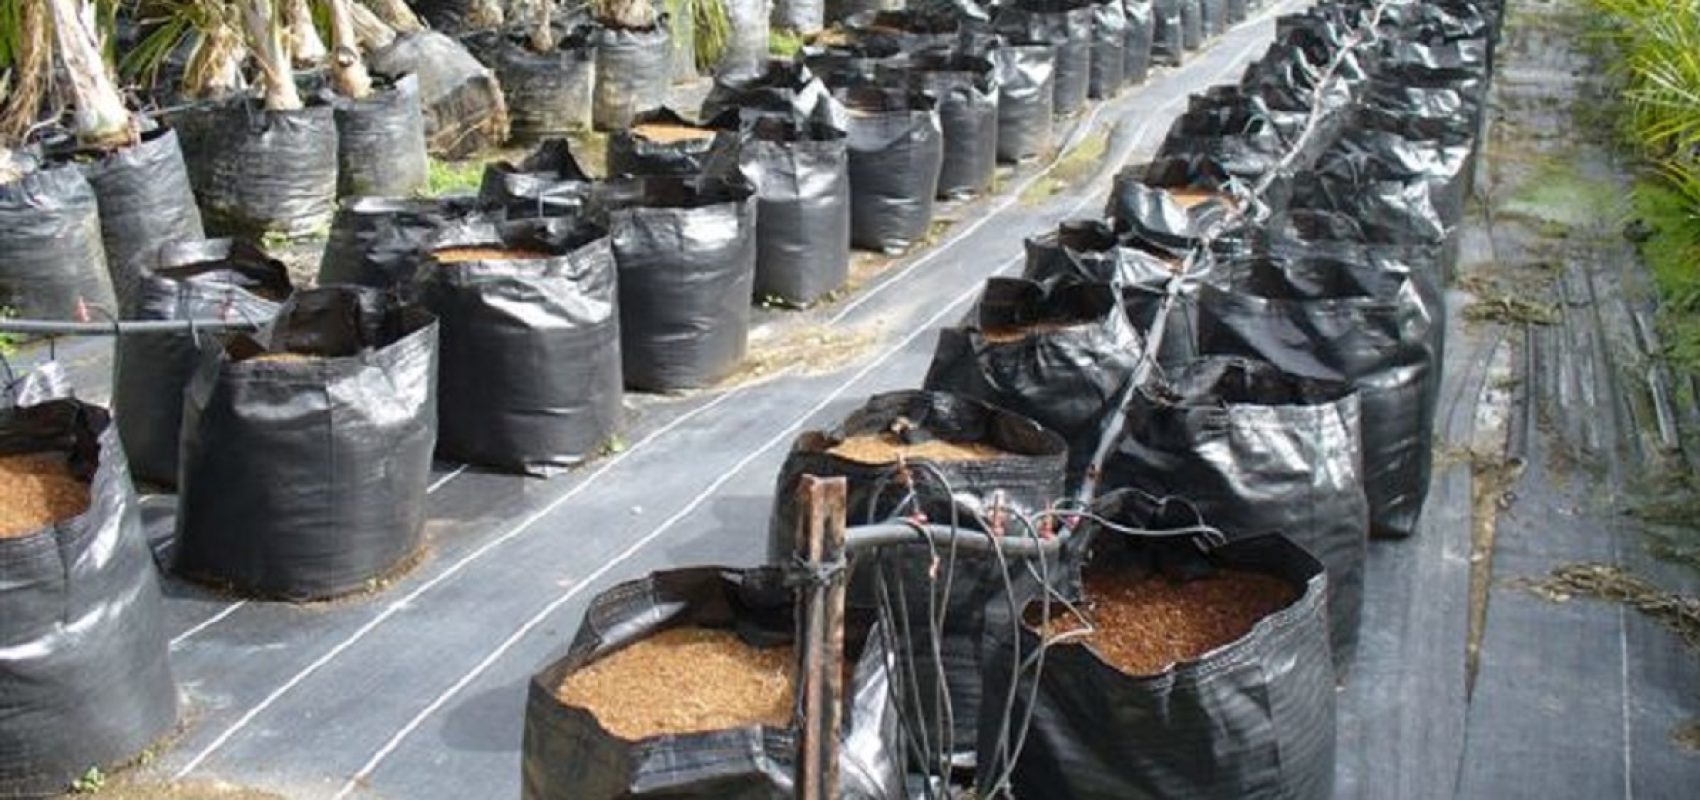 Grow Bags in Use 2